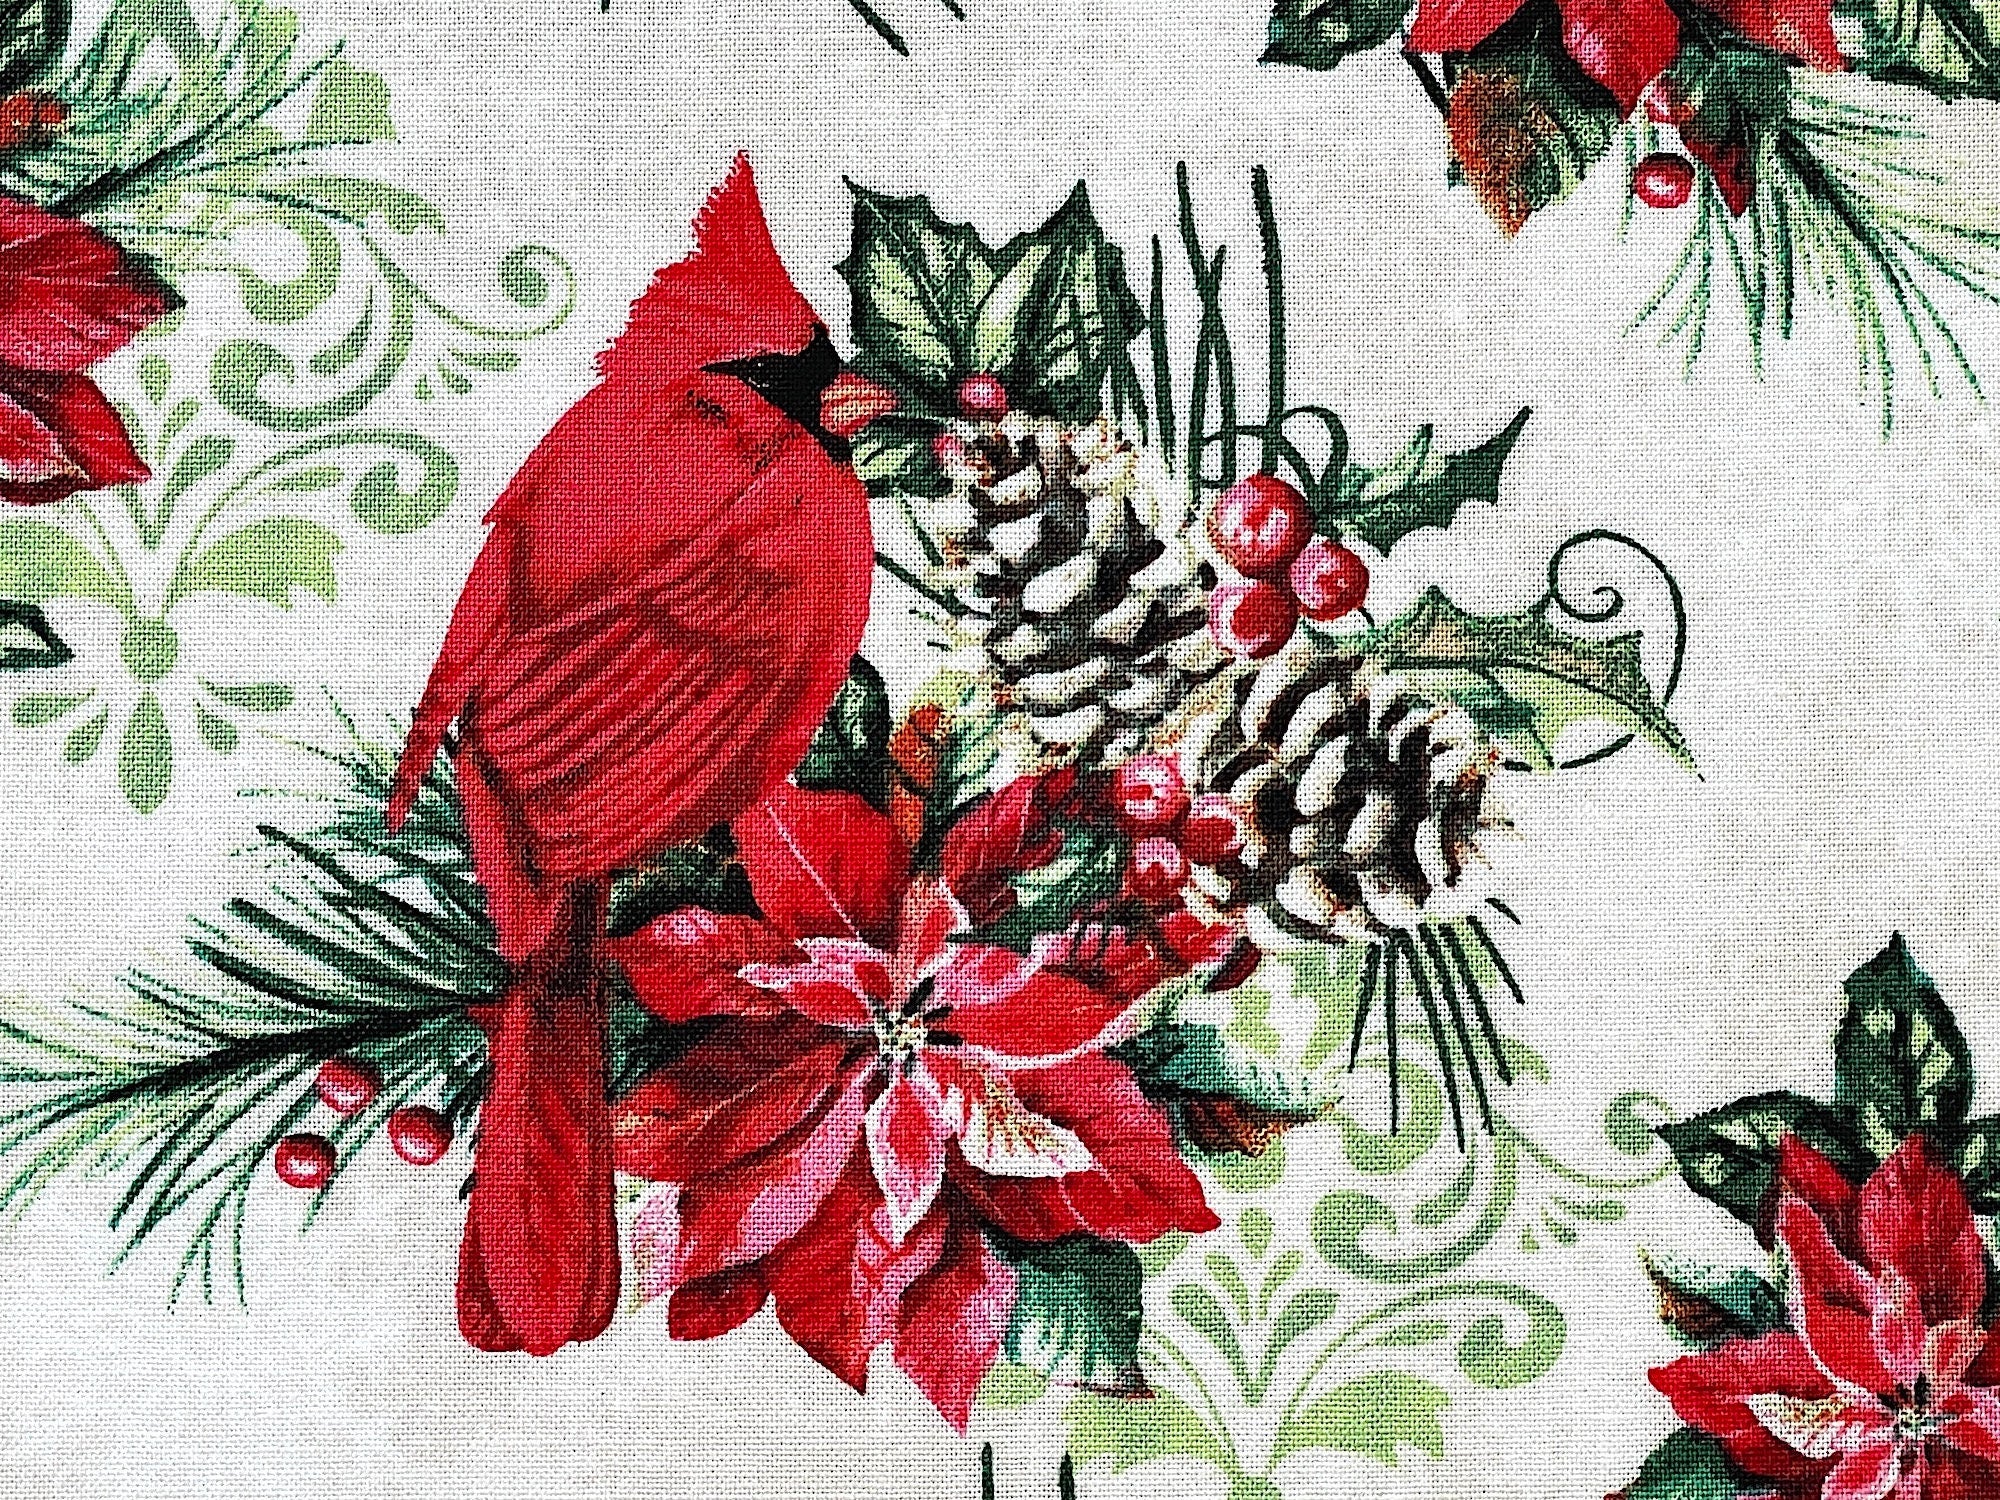 Close up of a red cardinal sitting on a branch with a poinsettia, pine cones, berries and more.